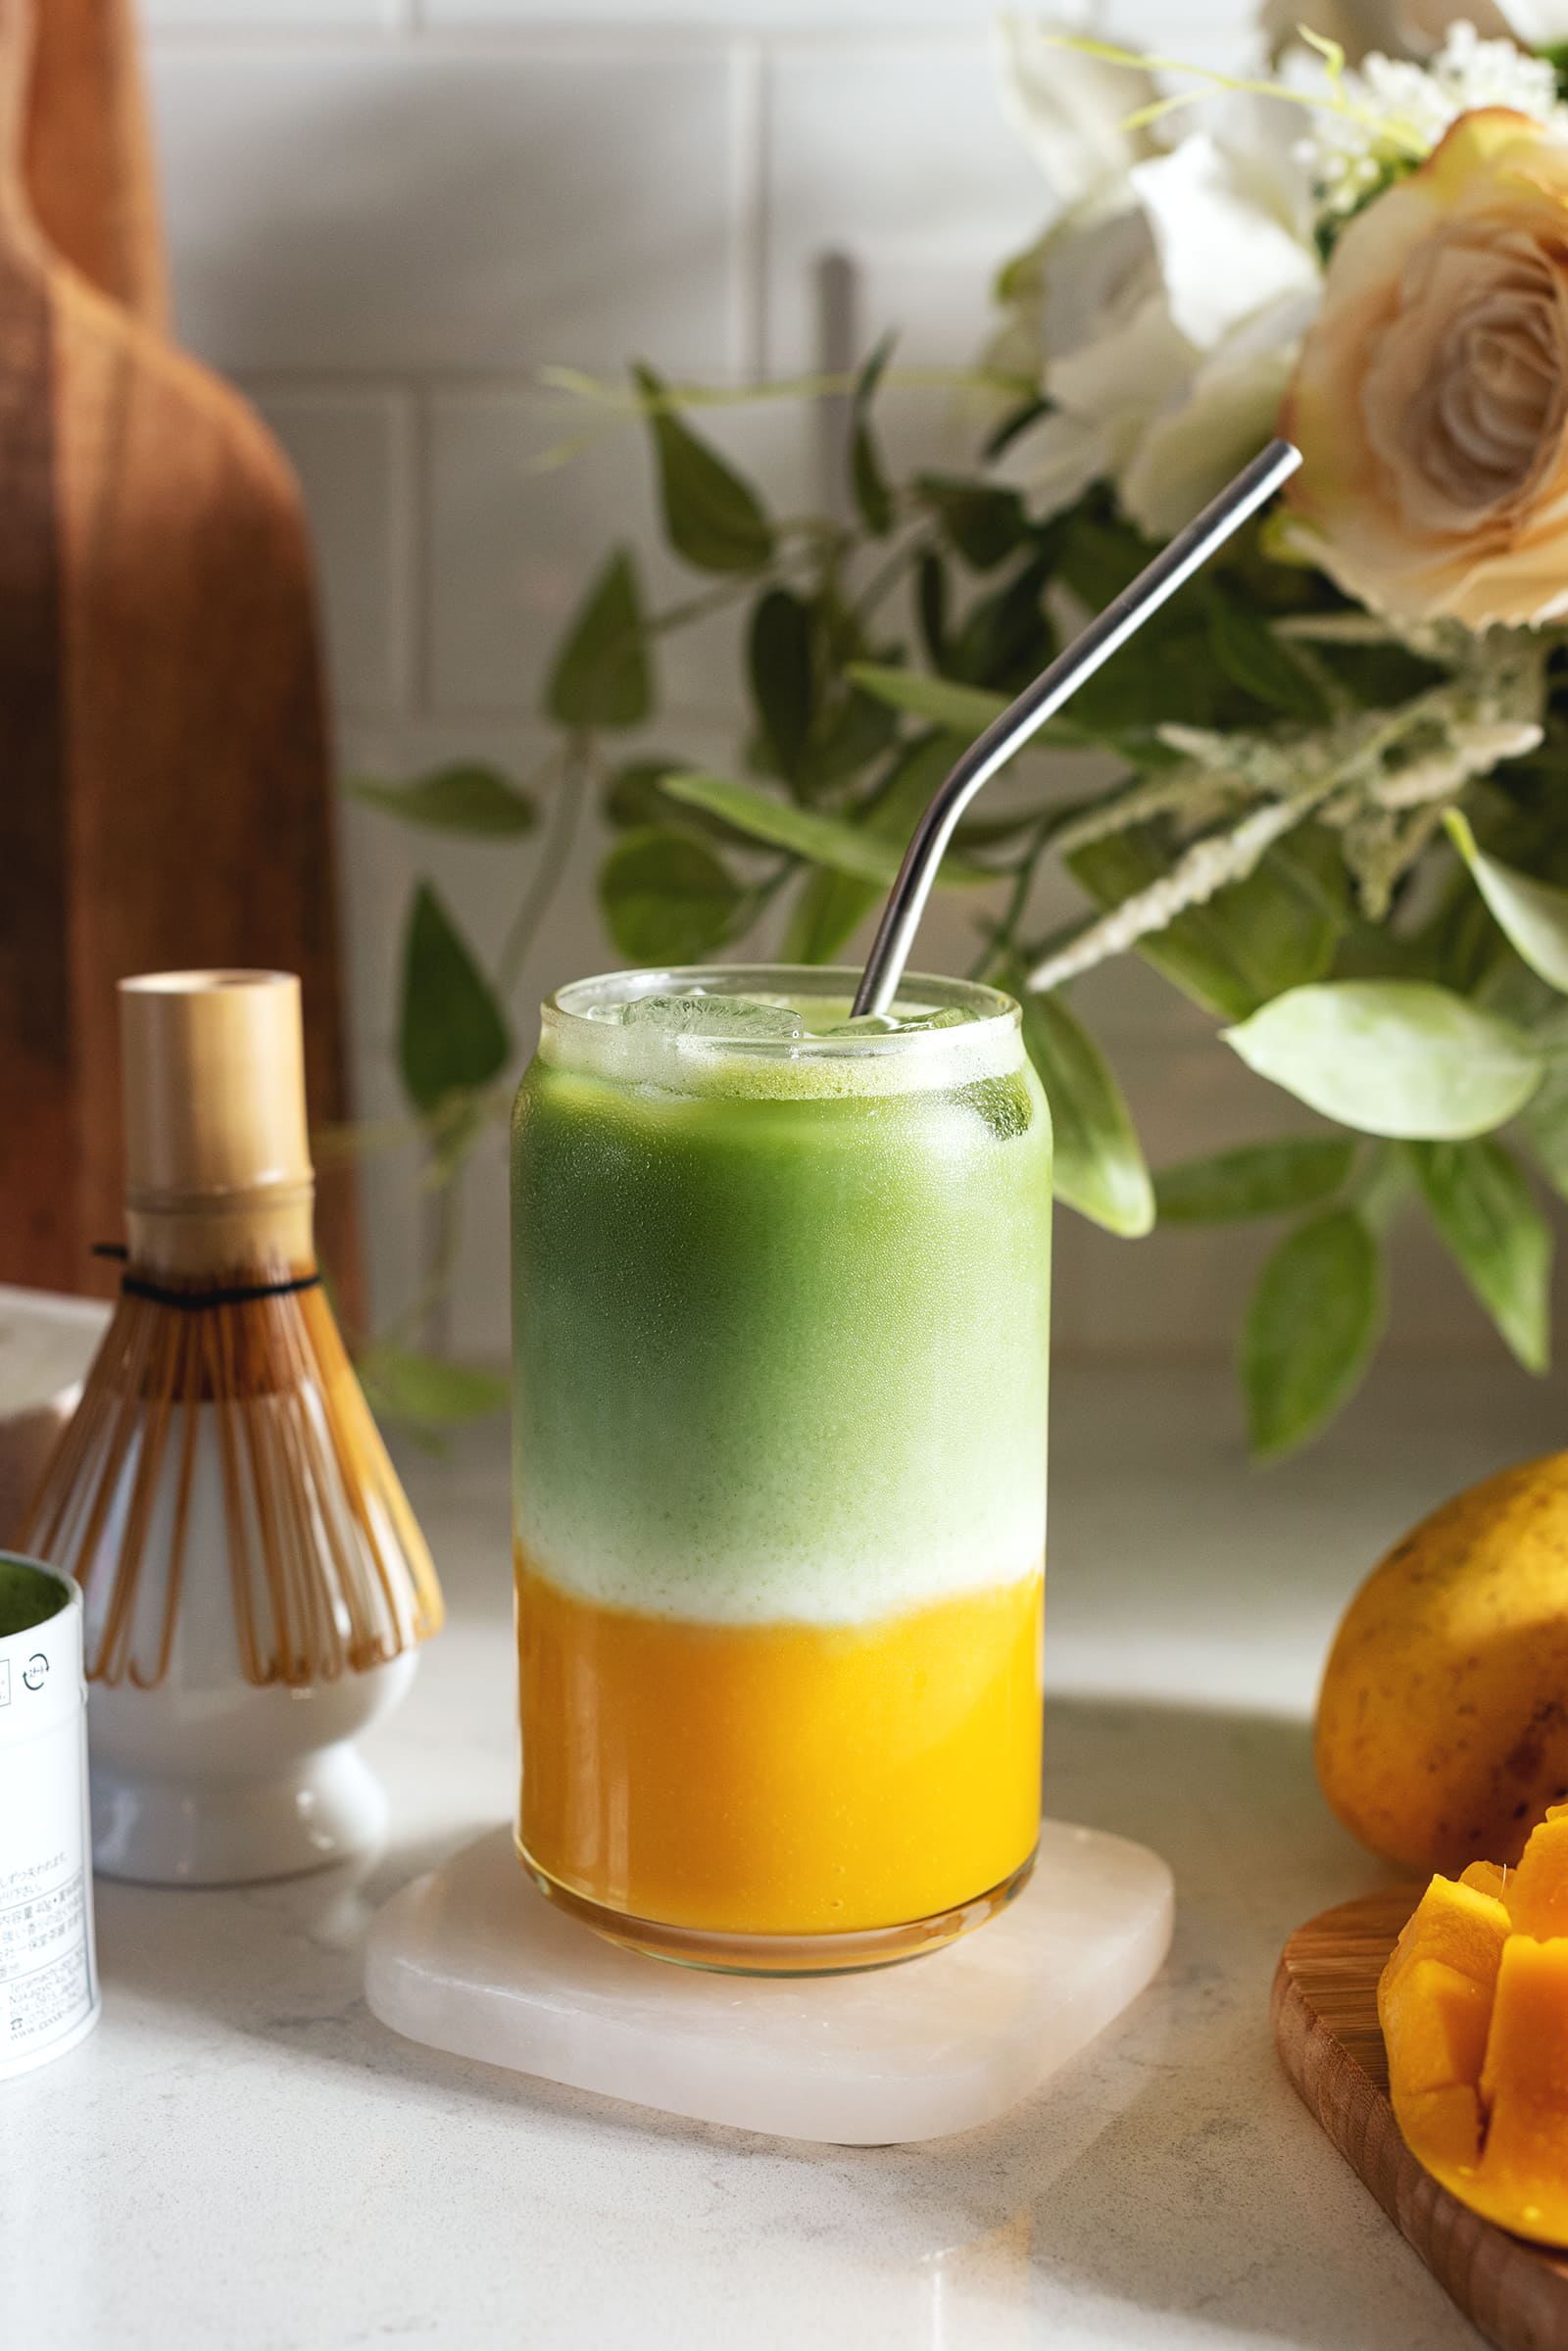 Glass filled with a layer of mango puree on the bottom and matcha on top.